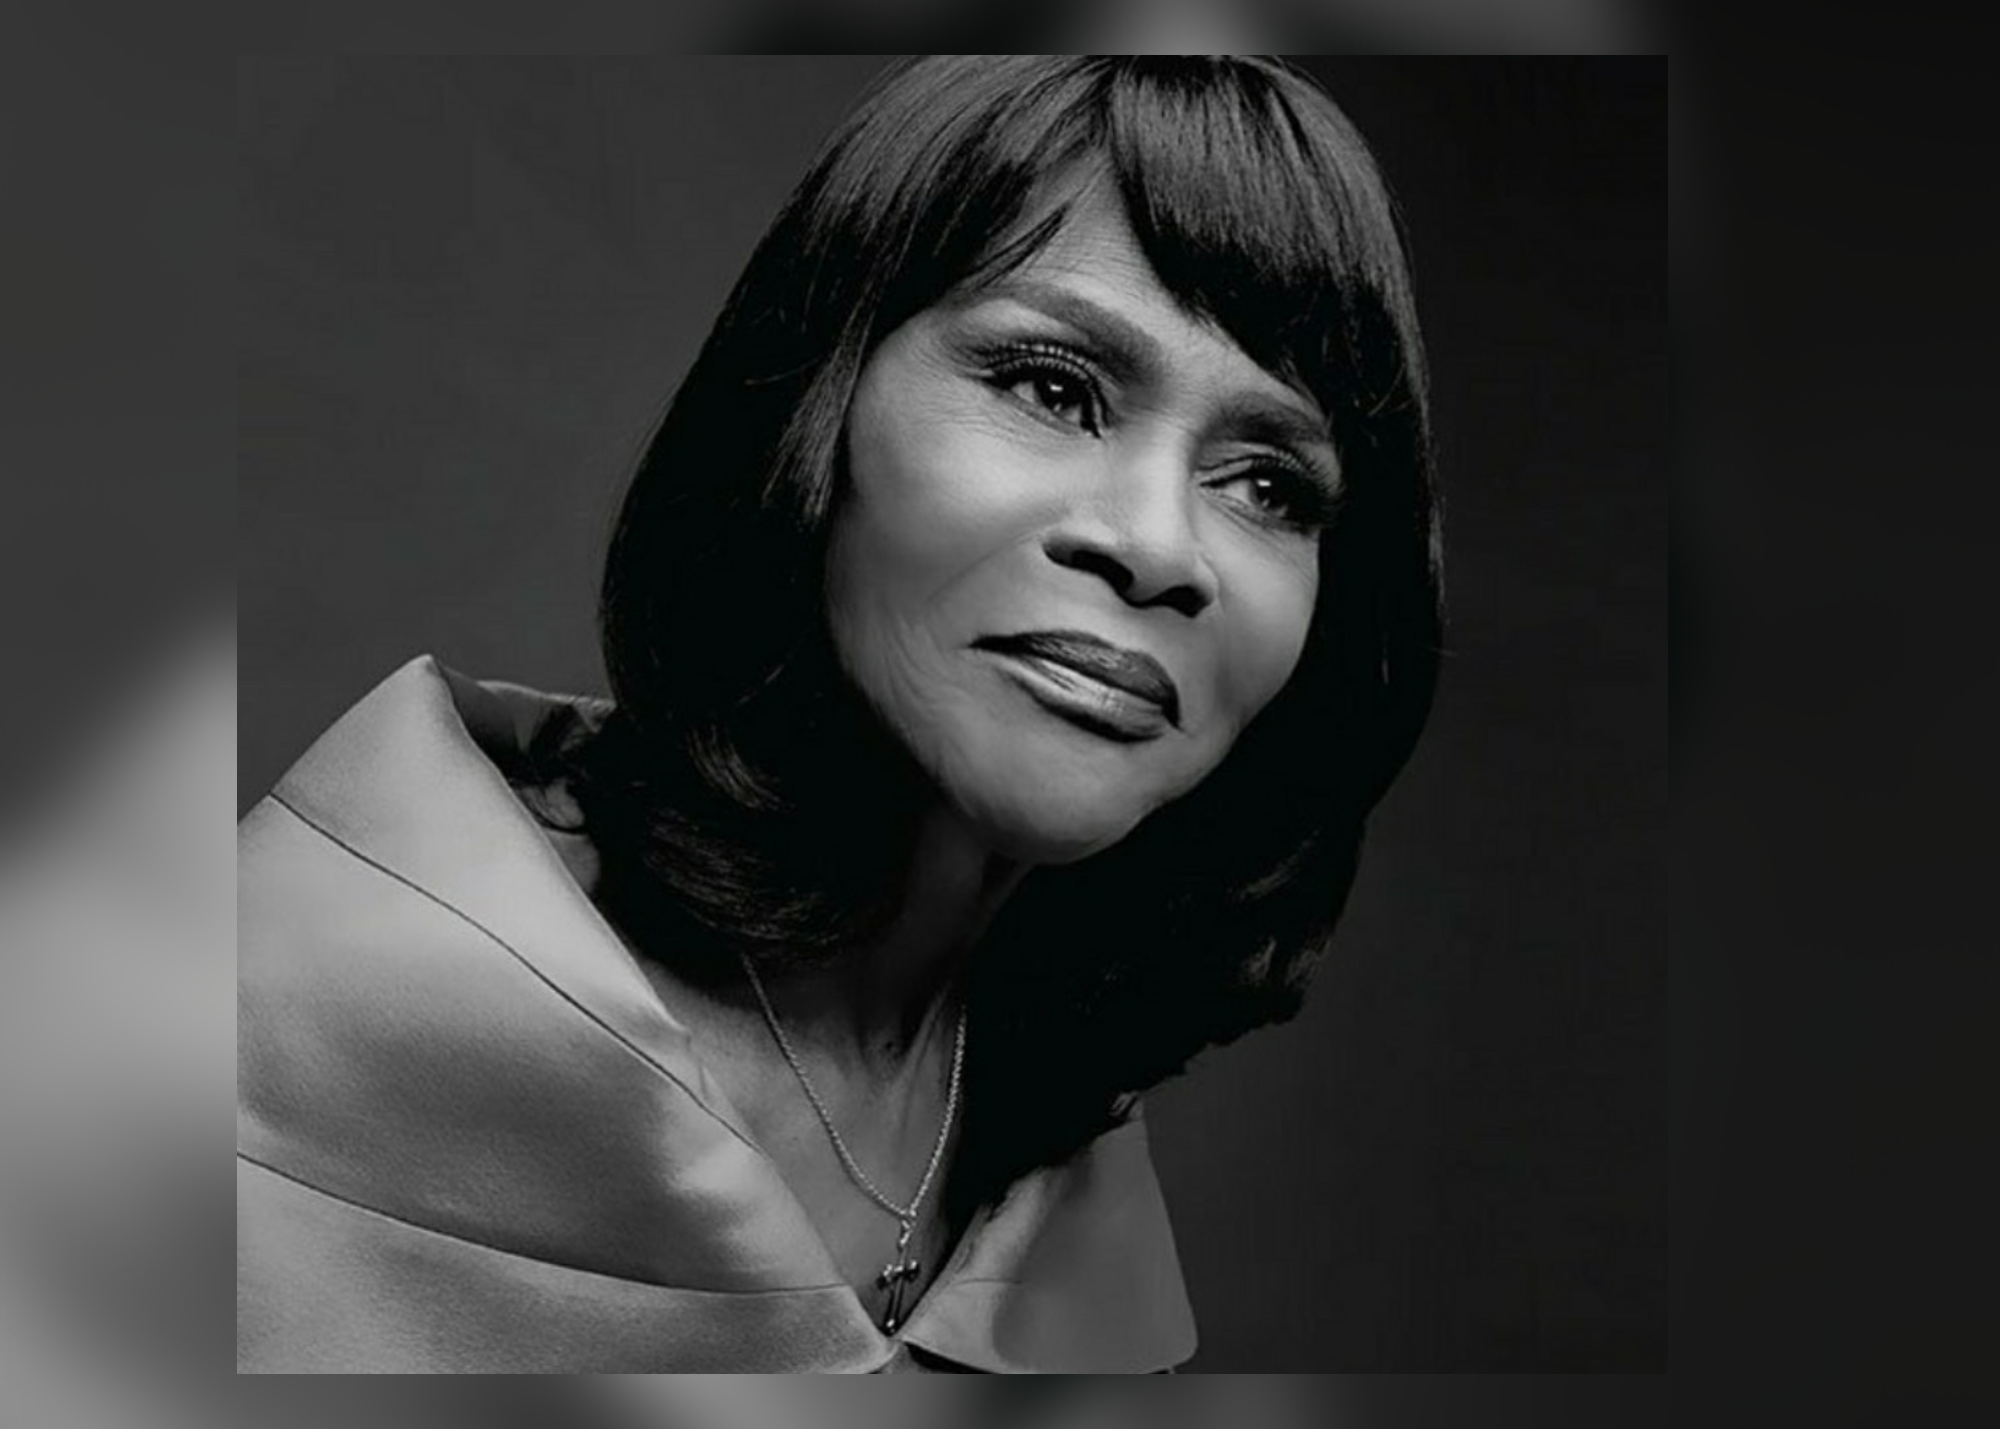 Cicely Tyson, Groundbreaking Award-Winning Actress, Has Passed Away At 96